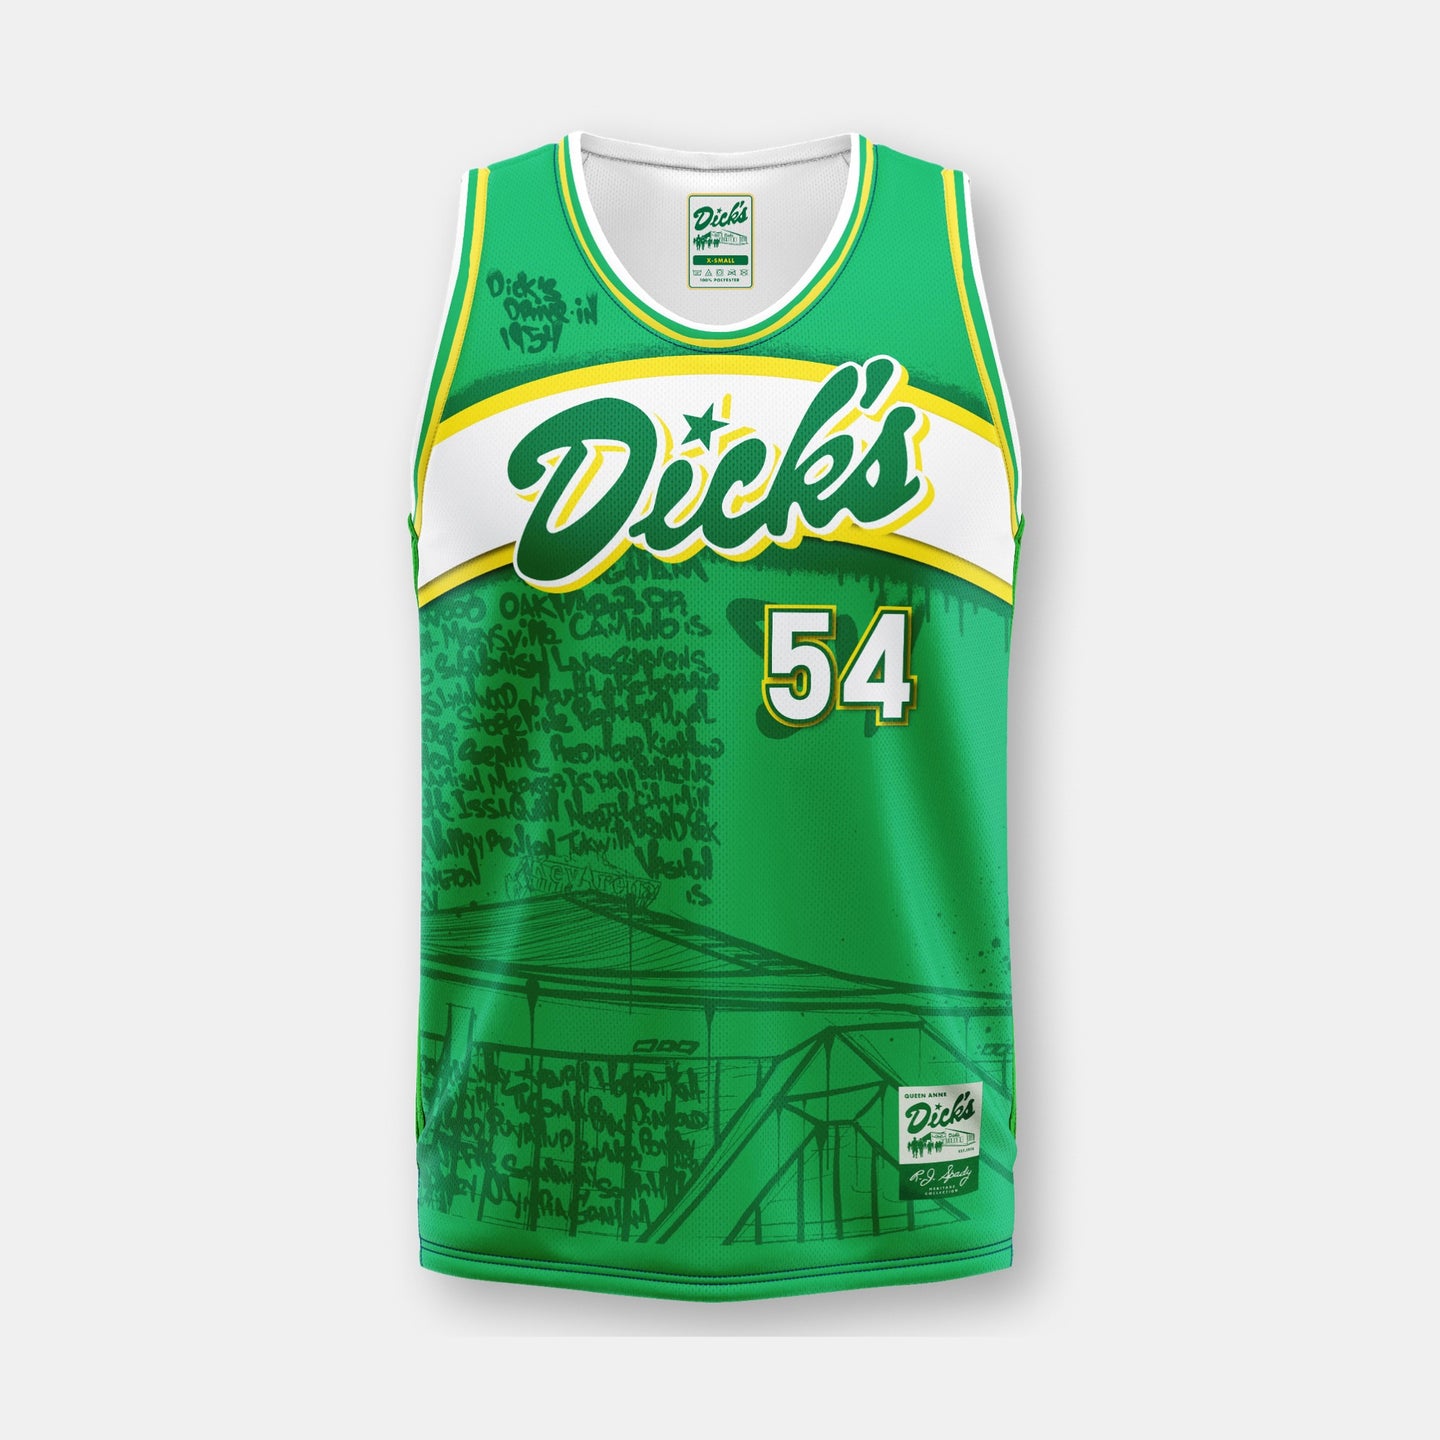 Green, yellow, white basketball jersey with graffiti graphics and text 